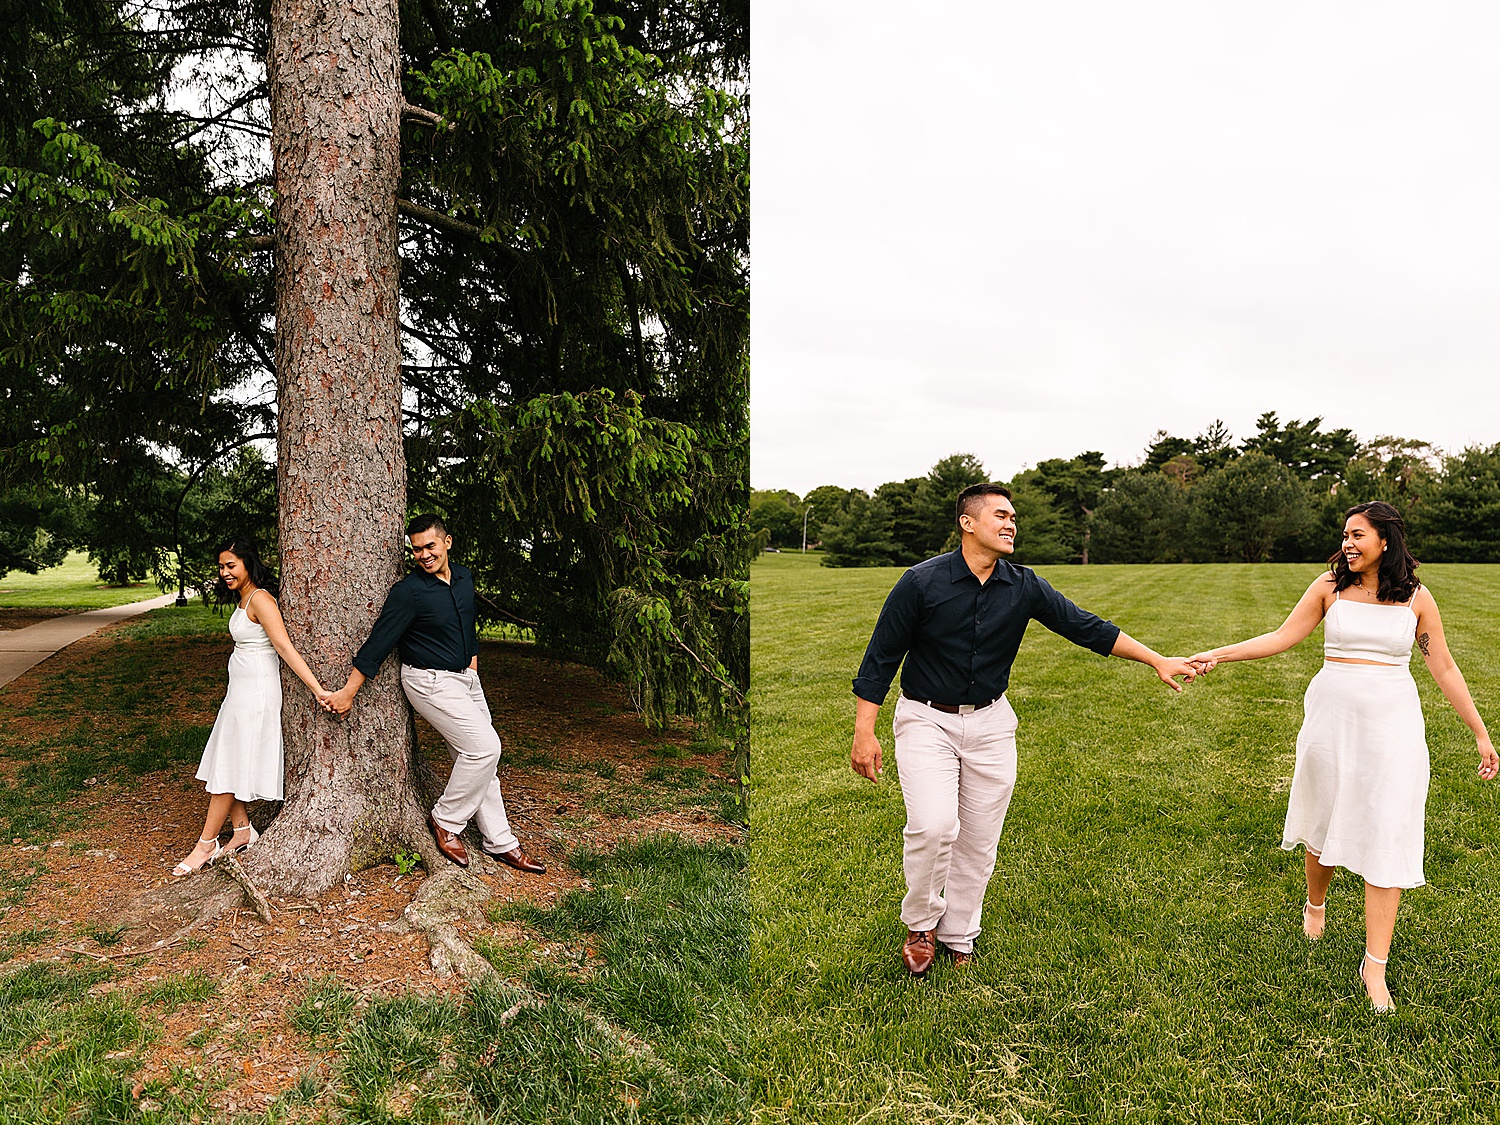 standing around tree for spring wedding portraits while holding hands 